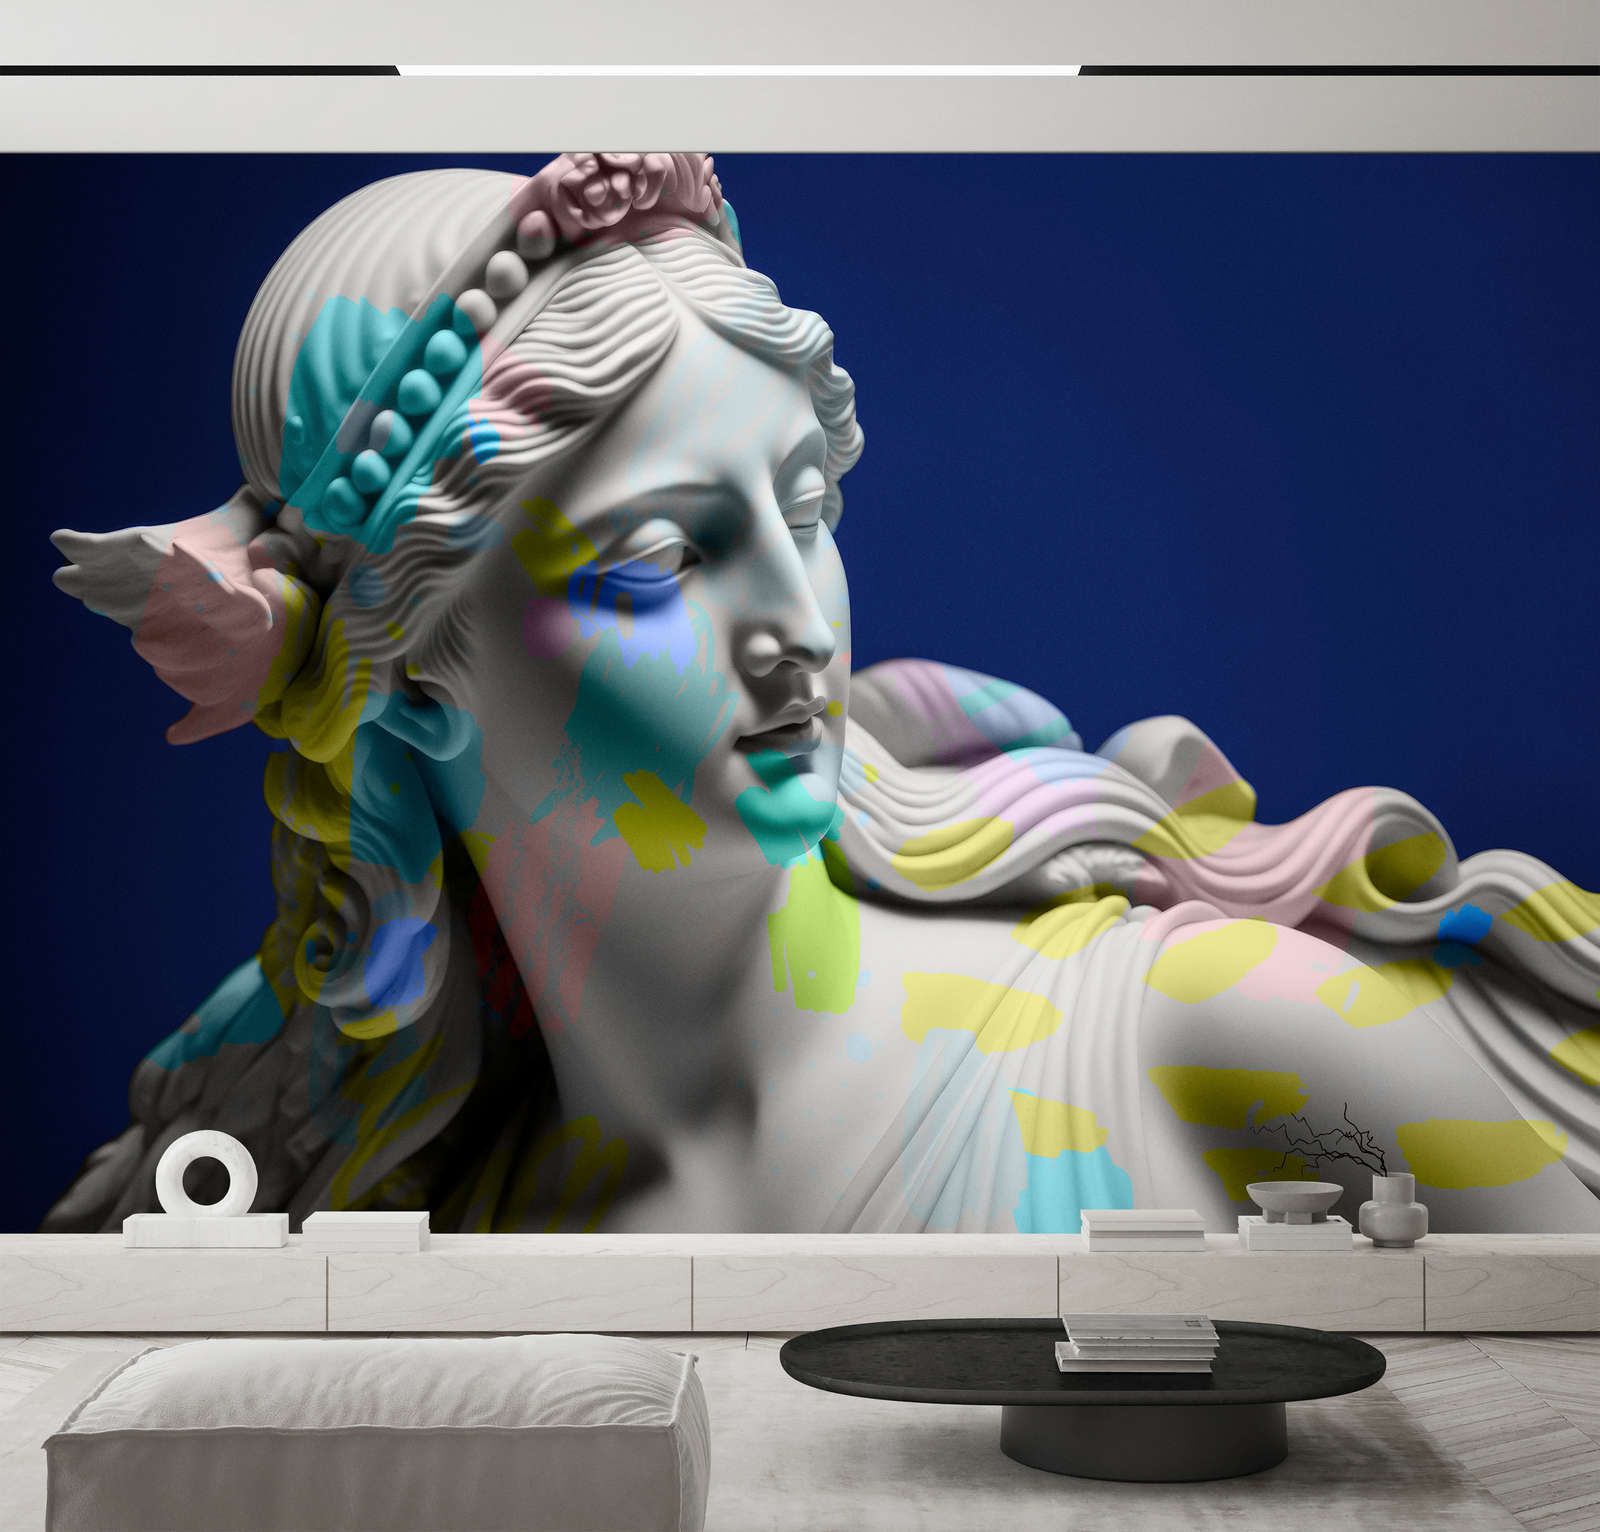             Photo wallpaper »anthea« - female sculpture with colourful accents - Smooth, slightly shiny premium non-woven fabric
        